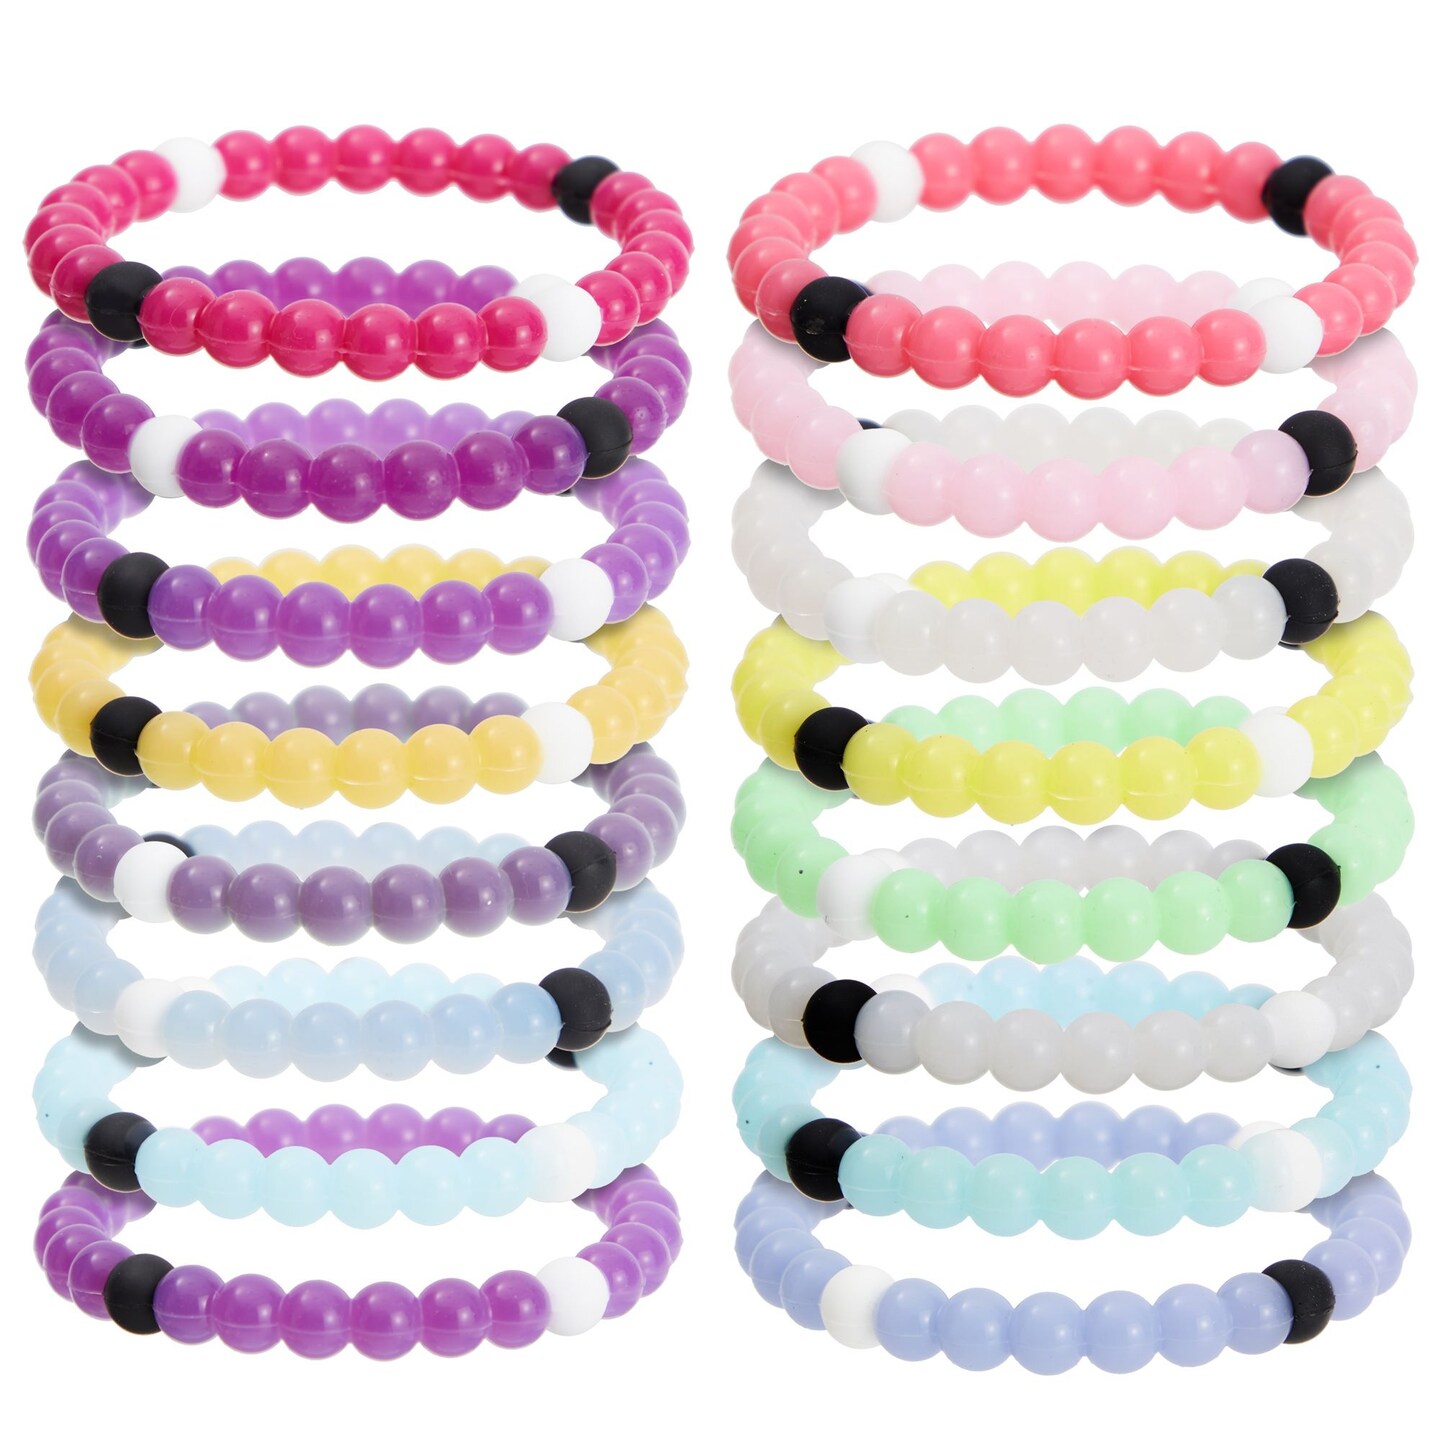 10pcs Colorful Luminous Silicone Wristbands Rubber Ring Noctilucent  Extremely Thin Bracelet Hair Ties Rubber Bands Accessories - AliExpress